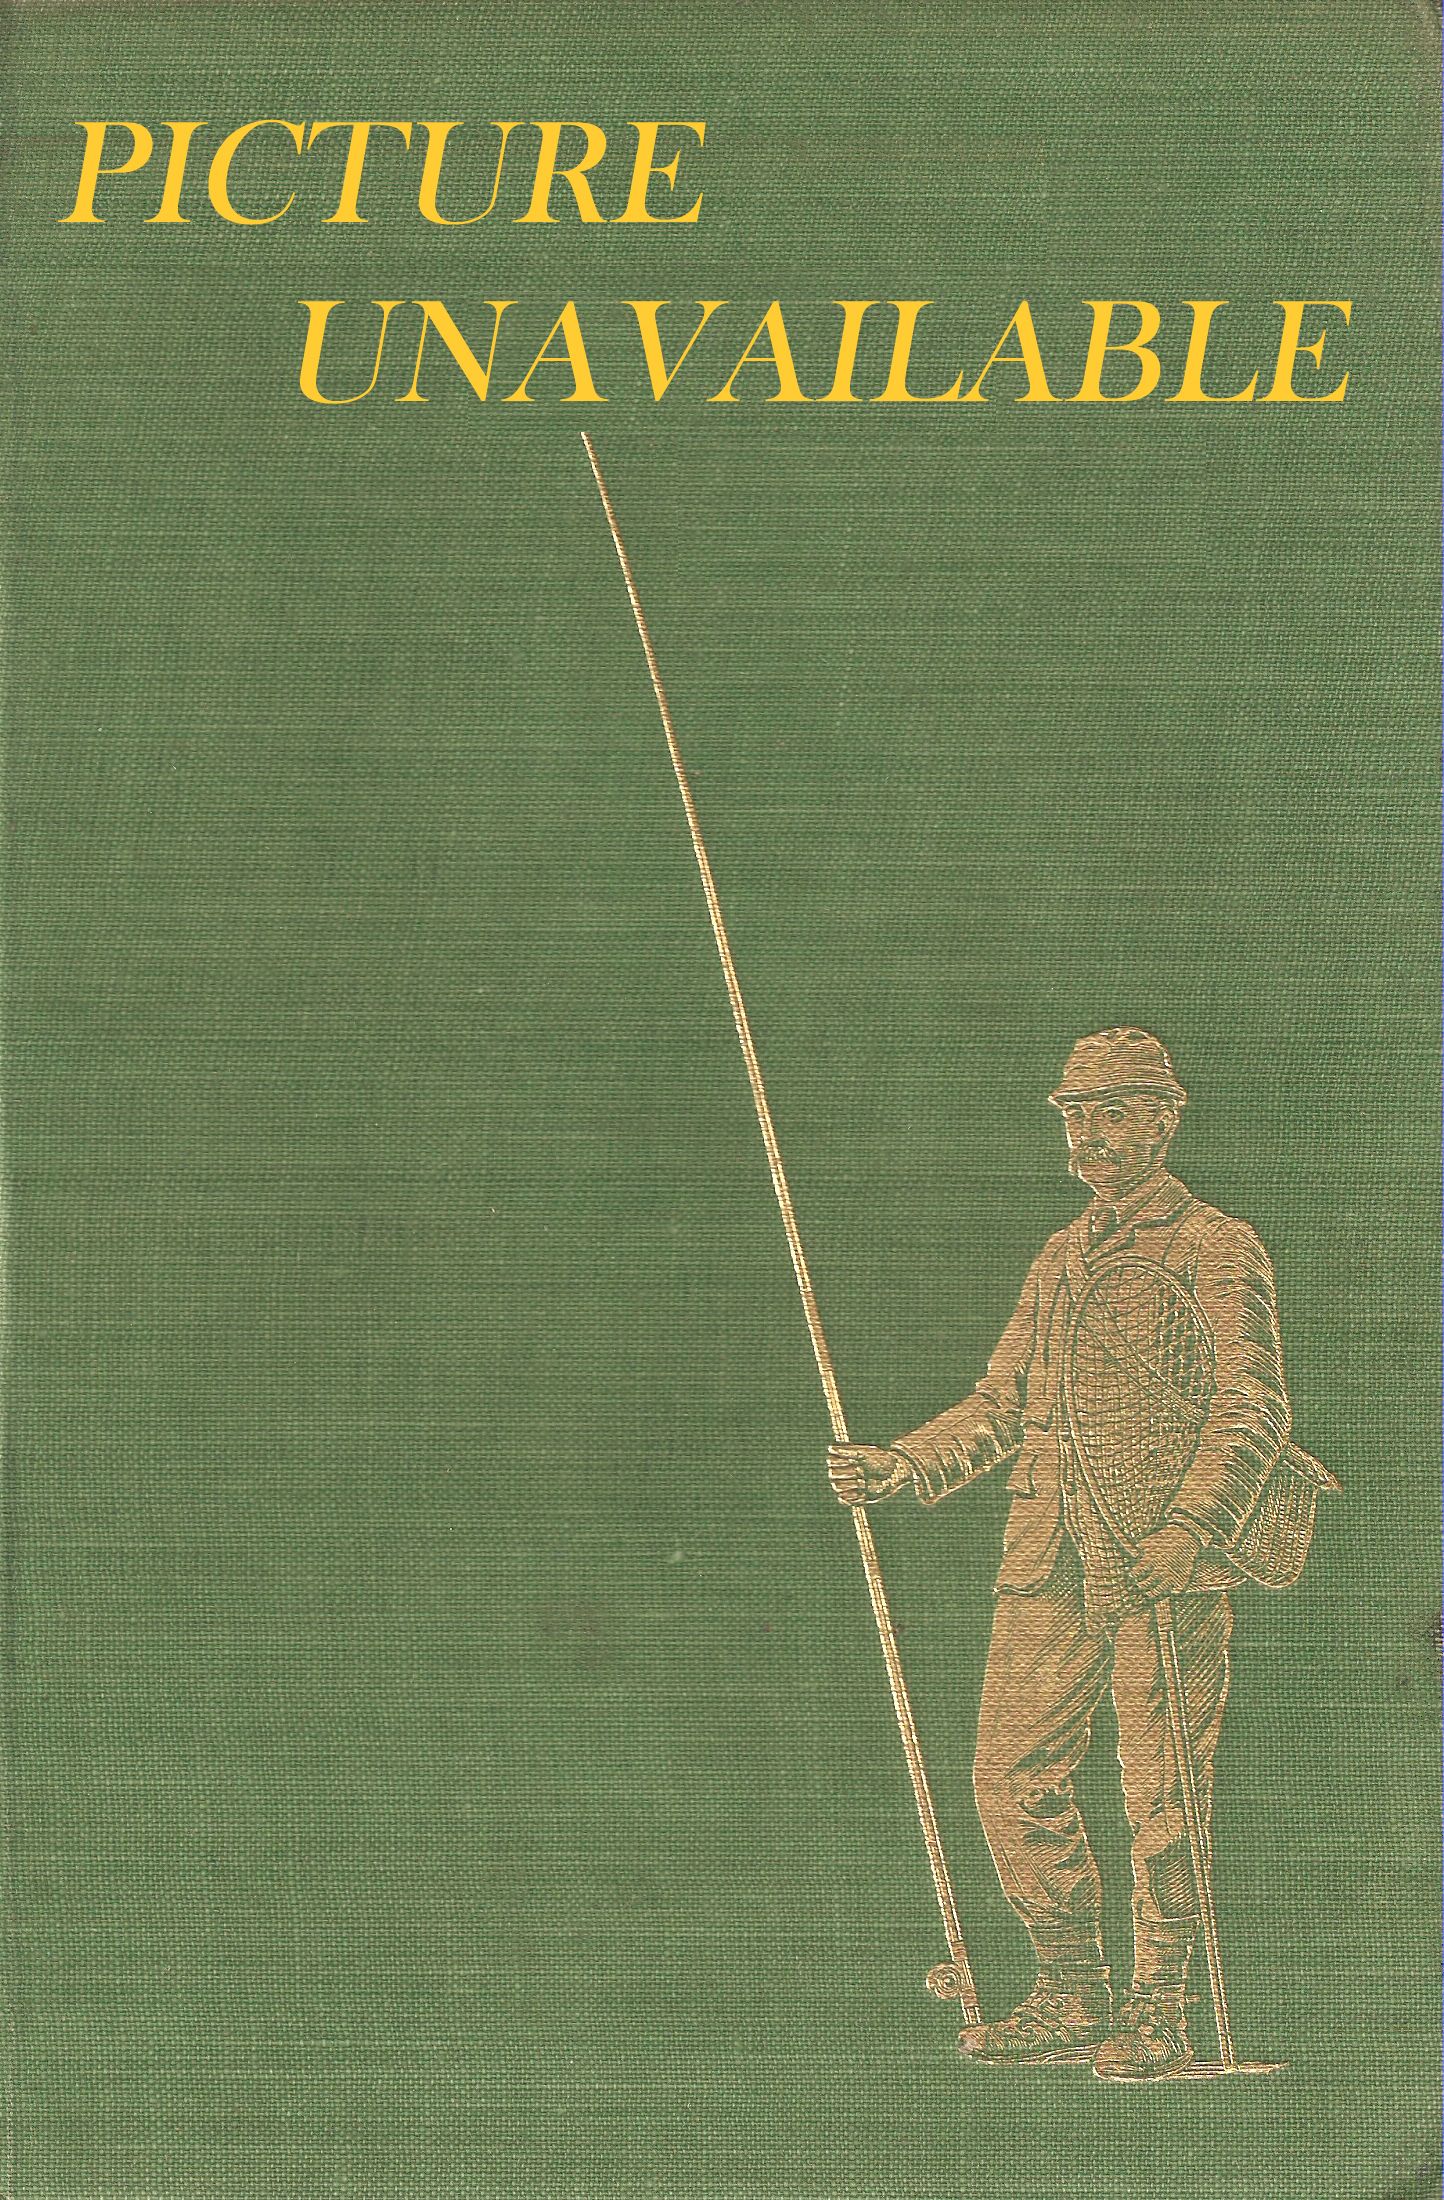 A DICTIONARY OF FLY-FISHING. By C.B. McCully.